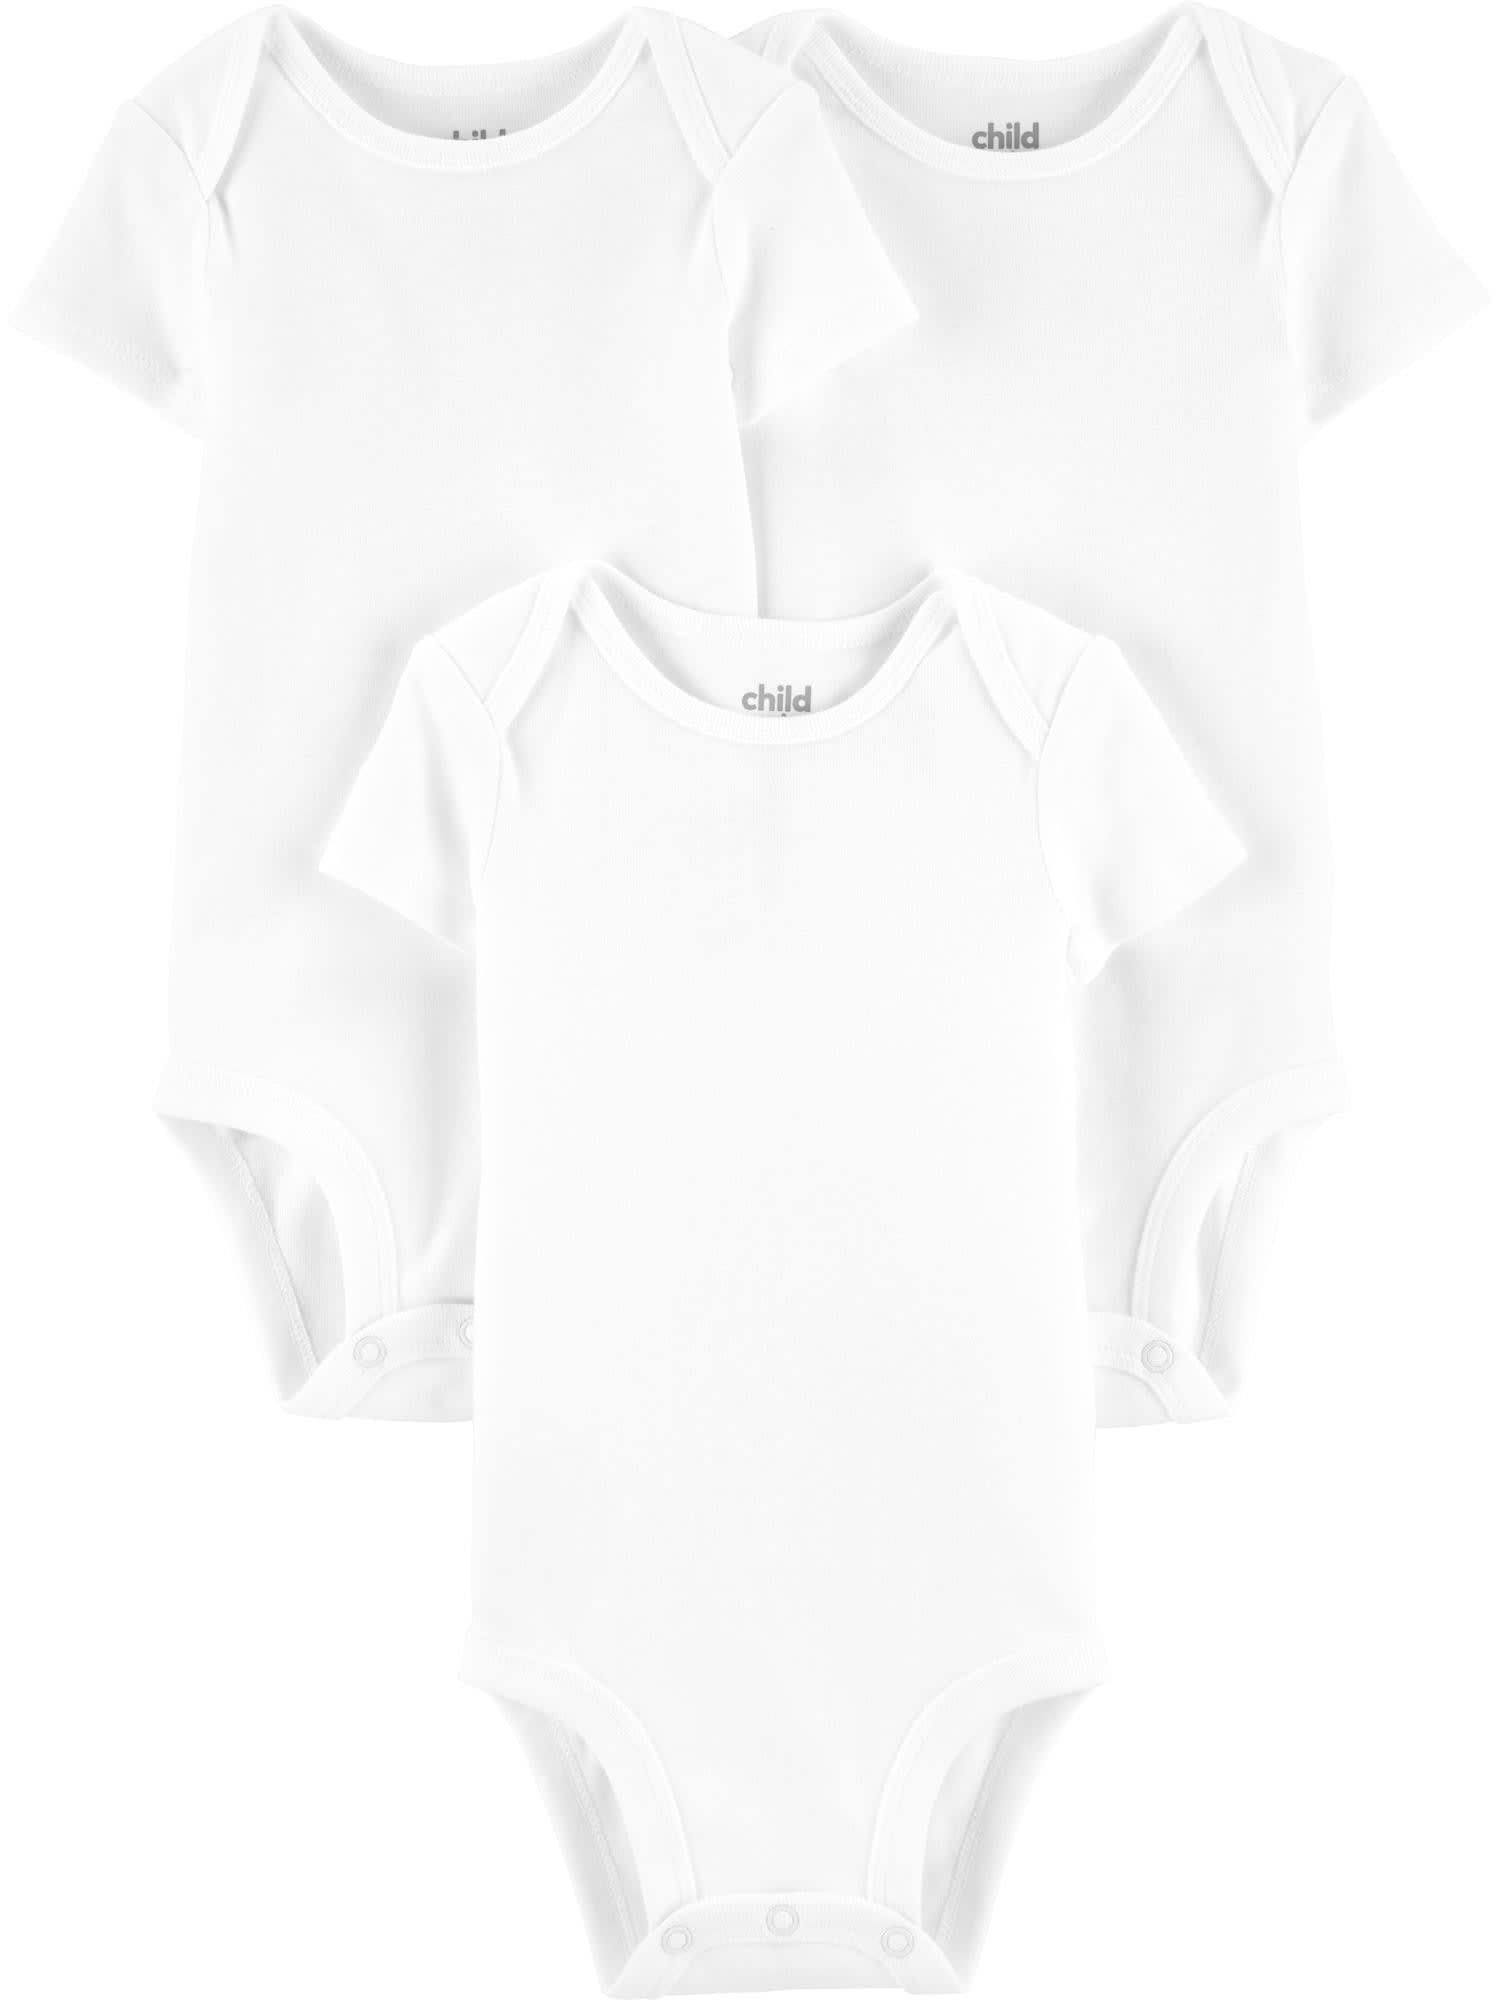 Modern Moments by Gerber Baby Boy Short Sleeve Bodysuits, 4-Pack